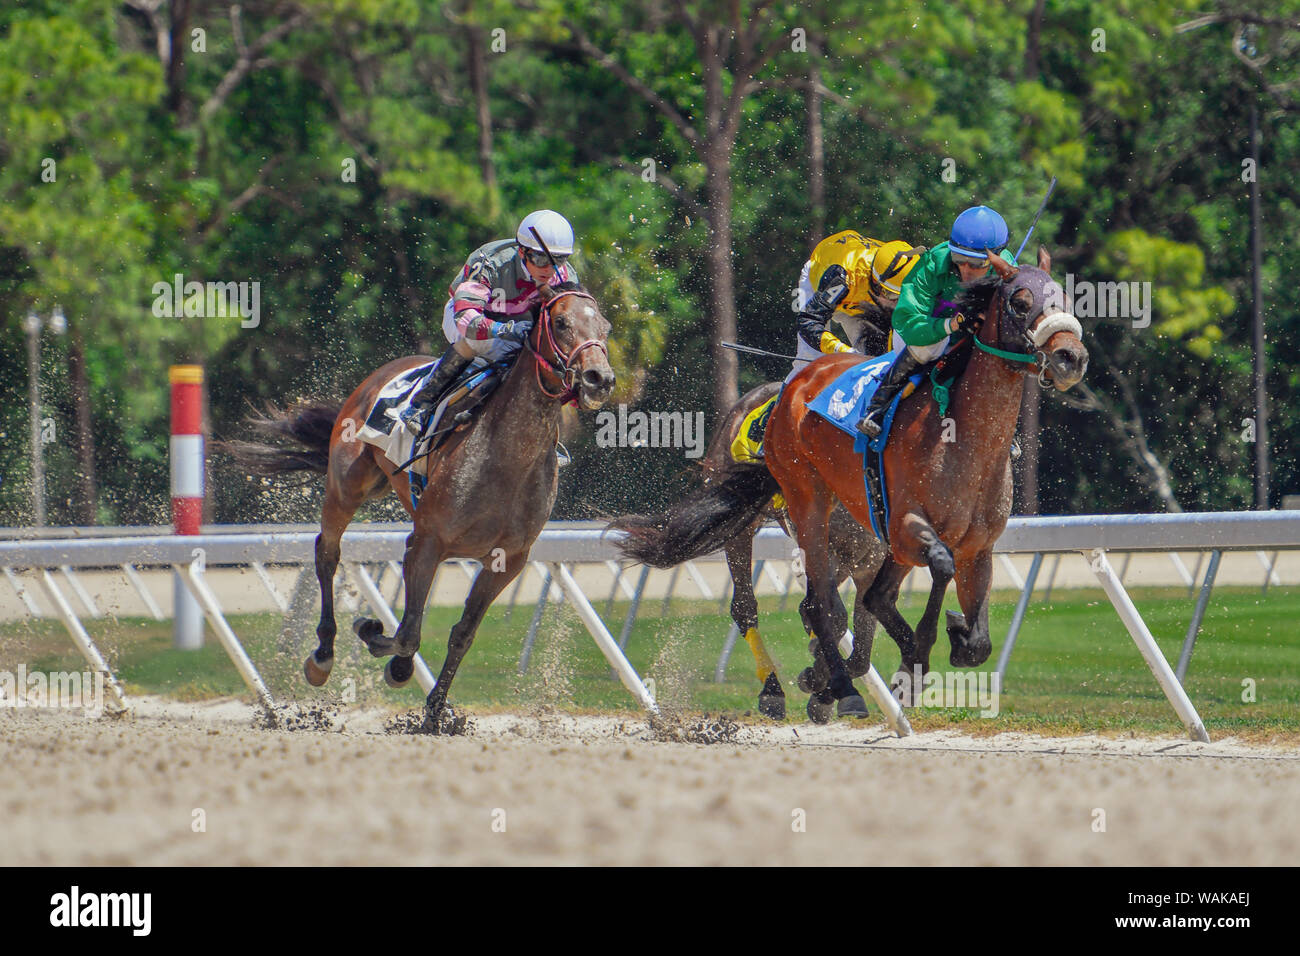 Jockeys on racing horses with dirt flying near the end of the race Stock Photo